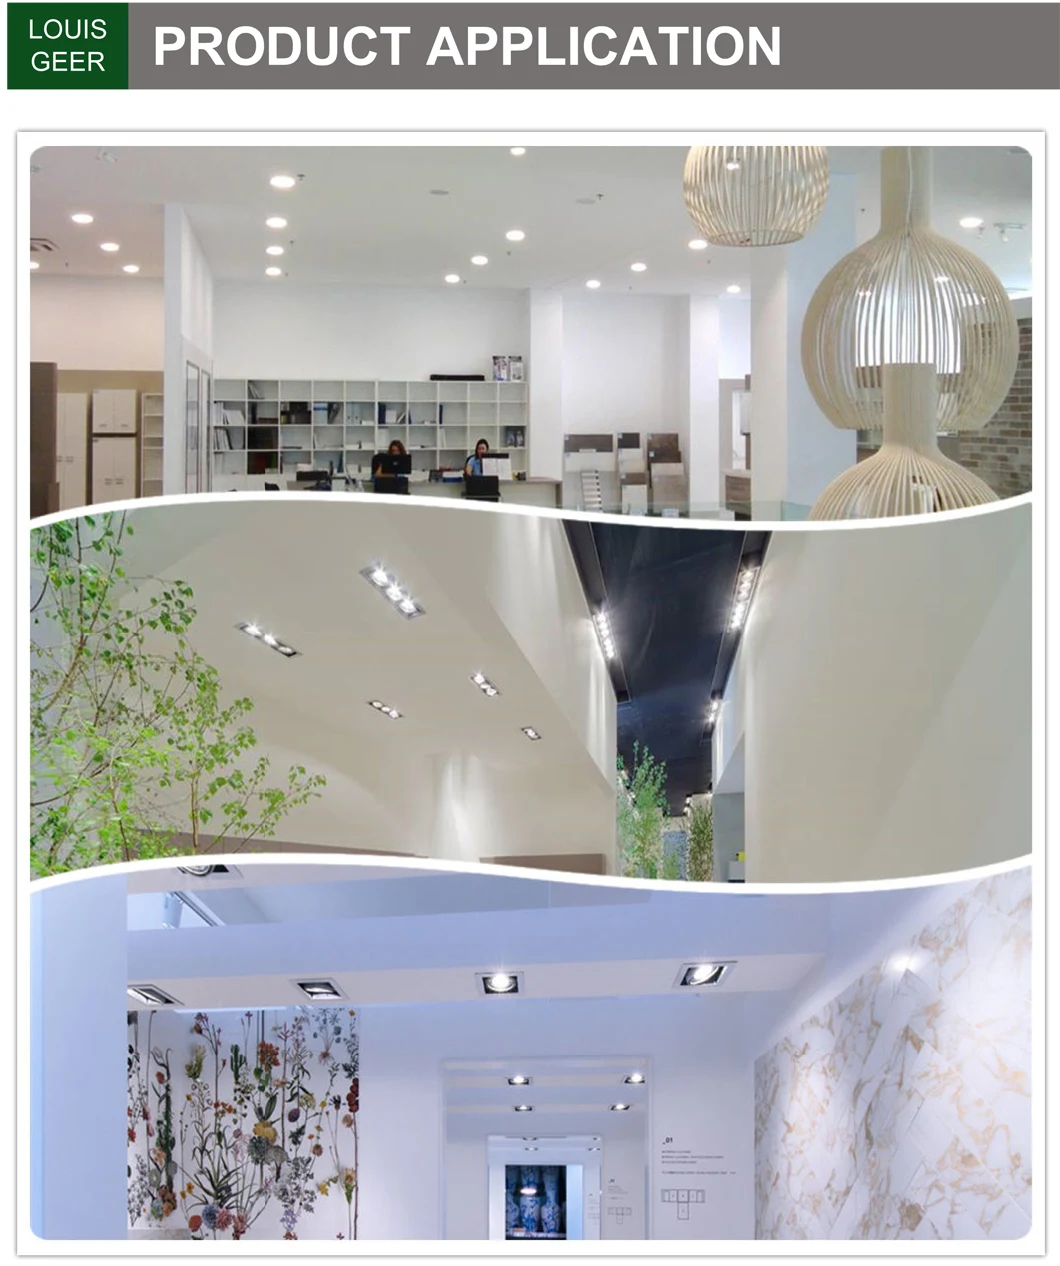 40W Round Ceiling Light Dimmable Downlights Anti-Glare LED Recessed Down Lights for Shops